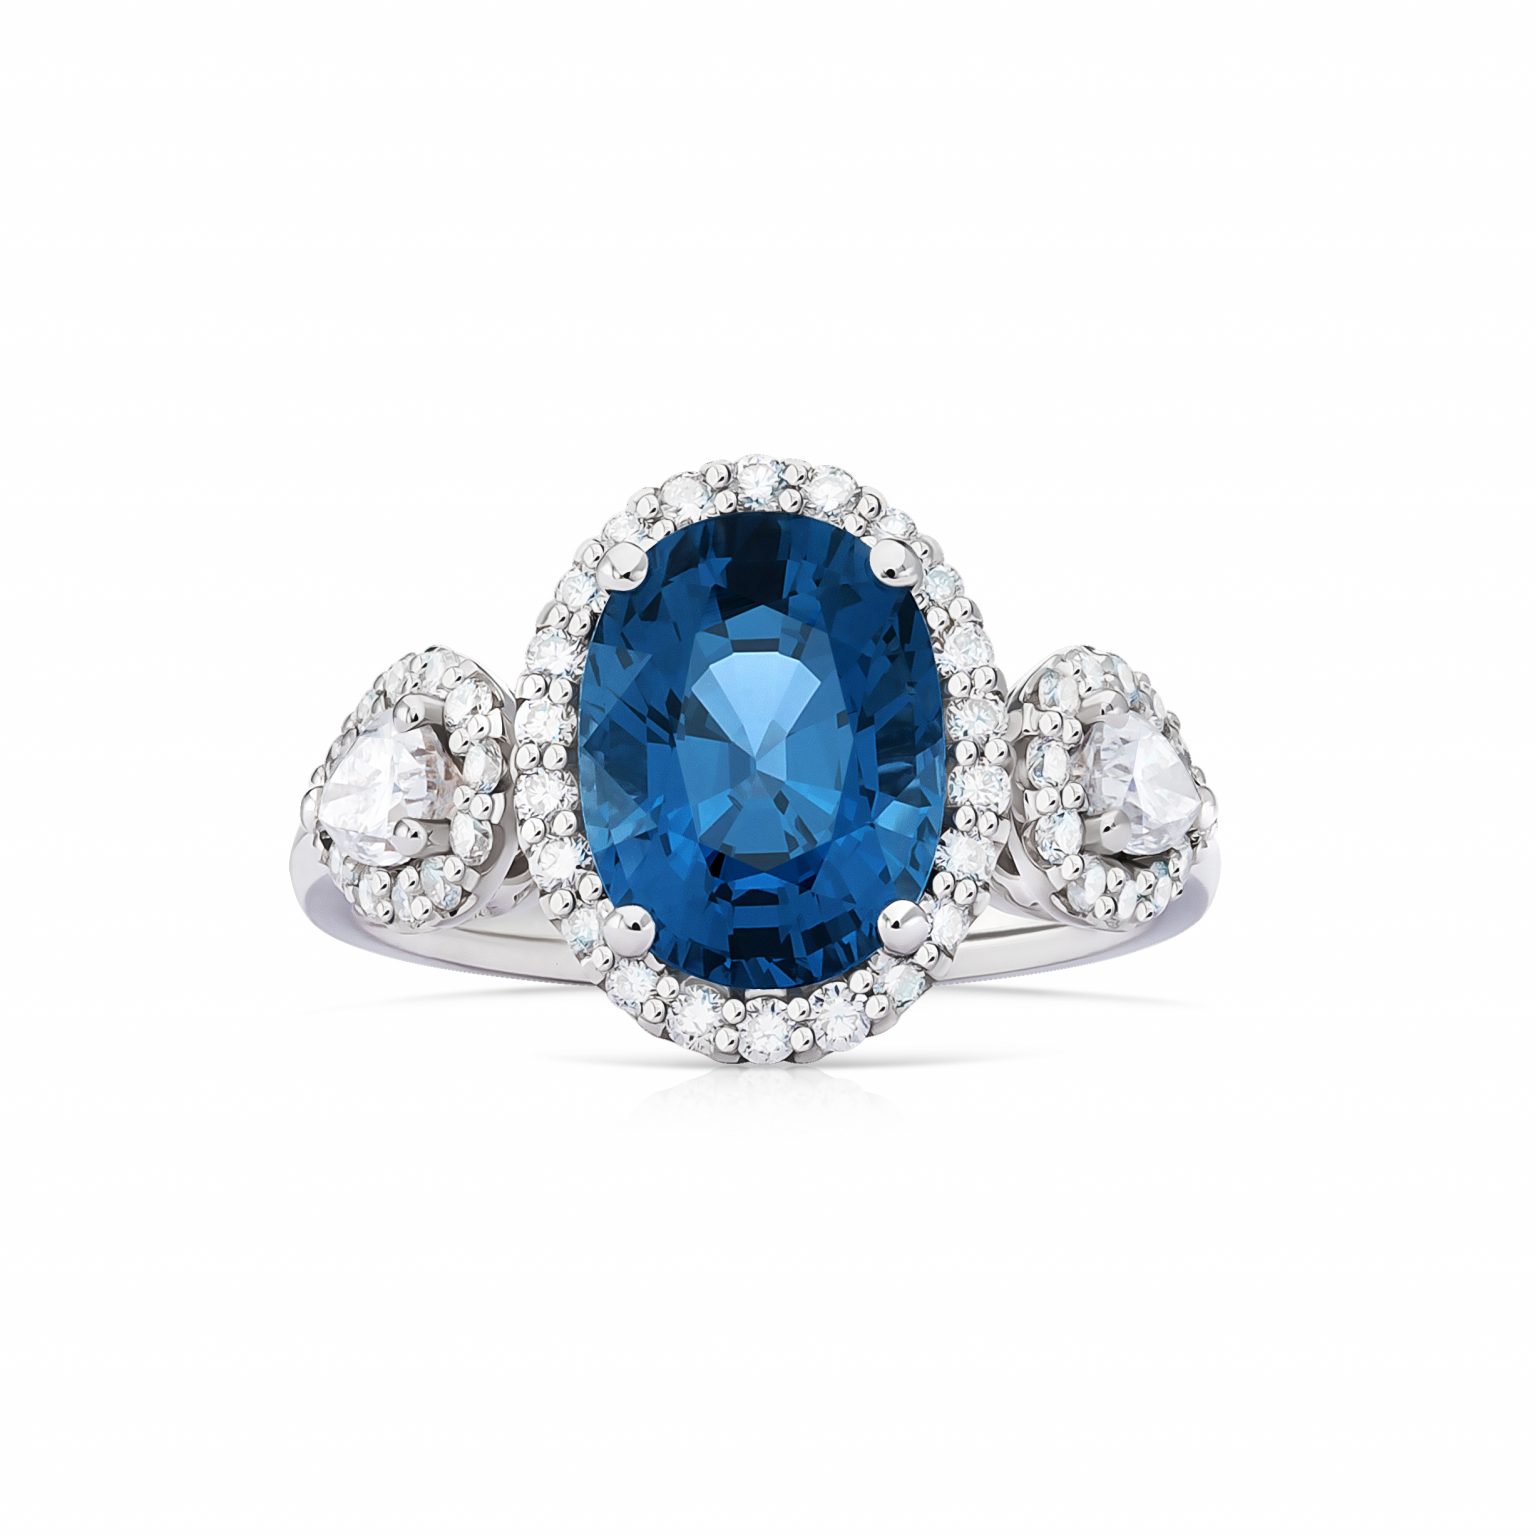 2.87 Carat Blue to Violet Spinel and Diamond Ring